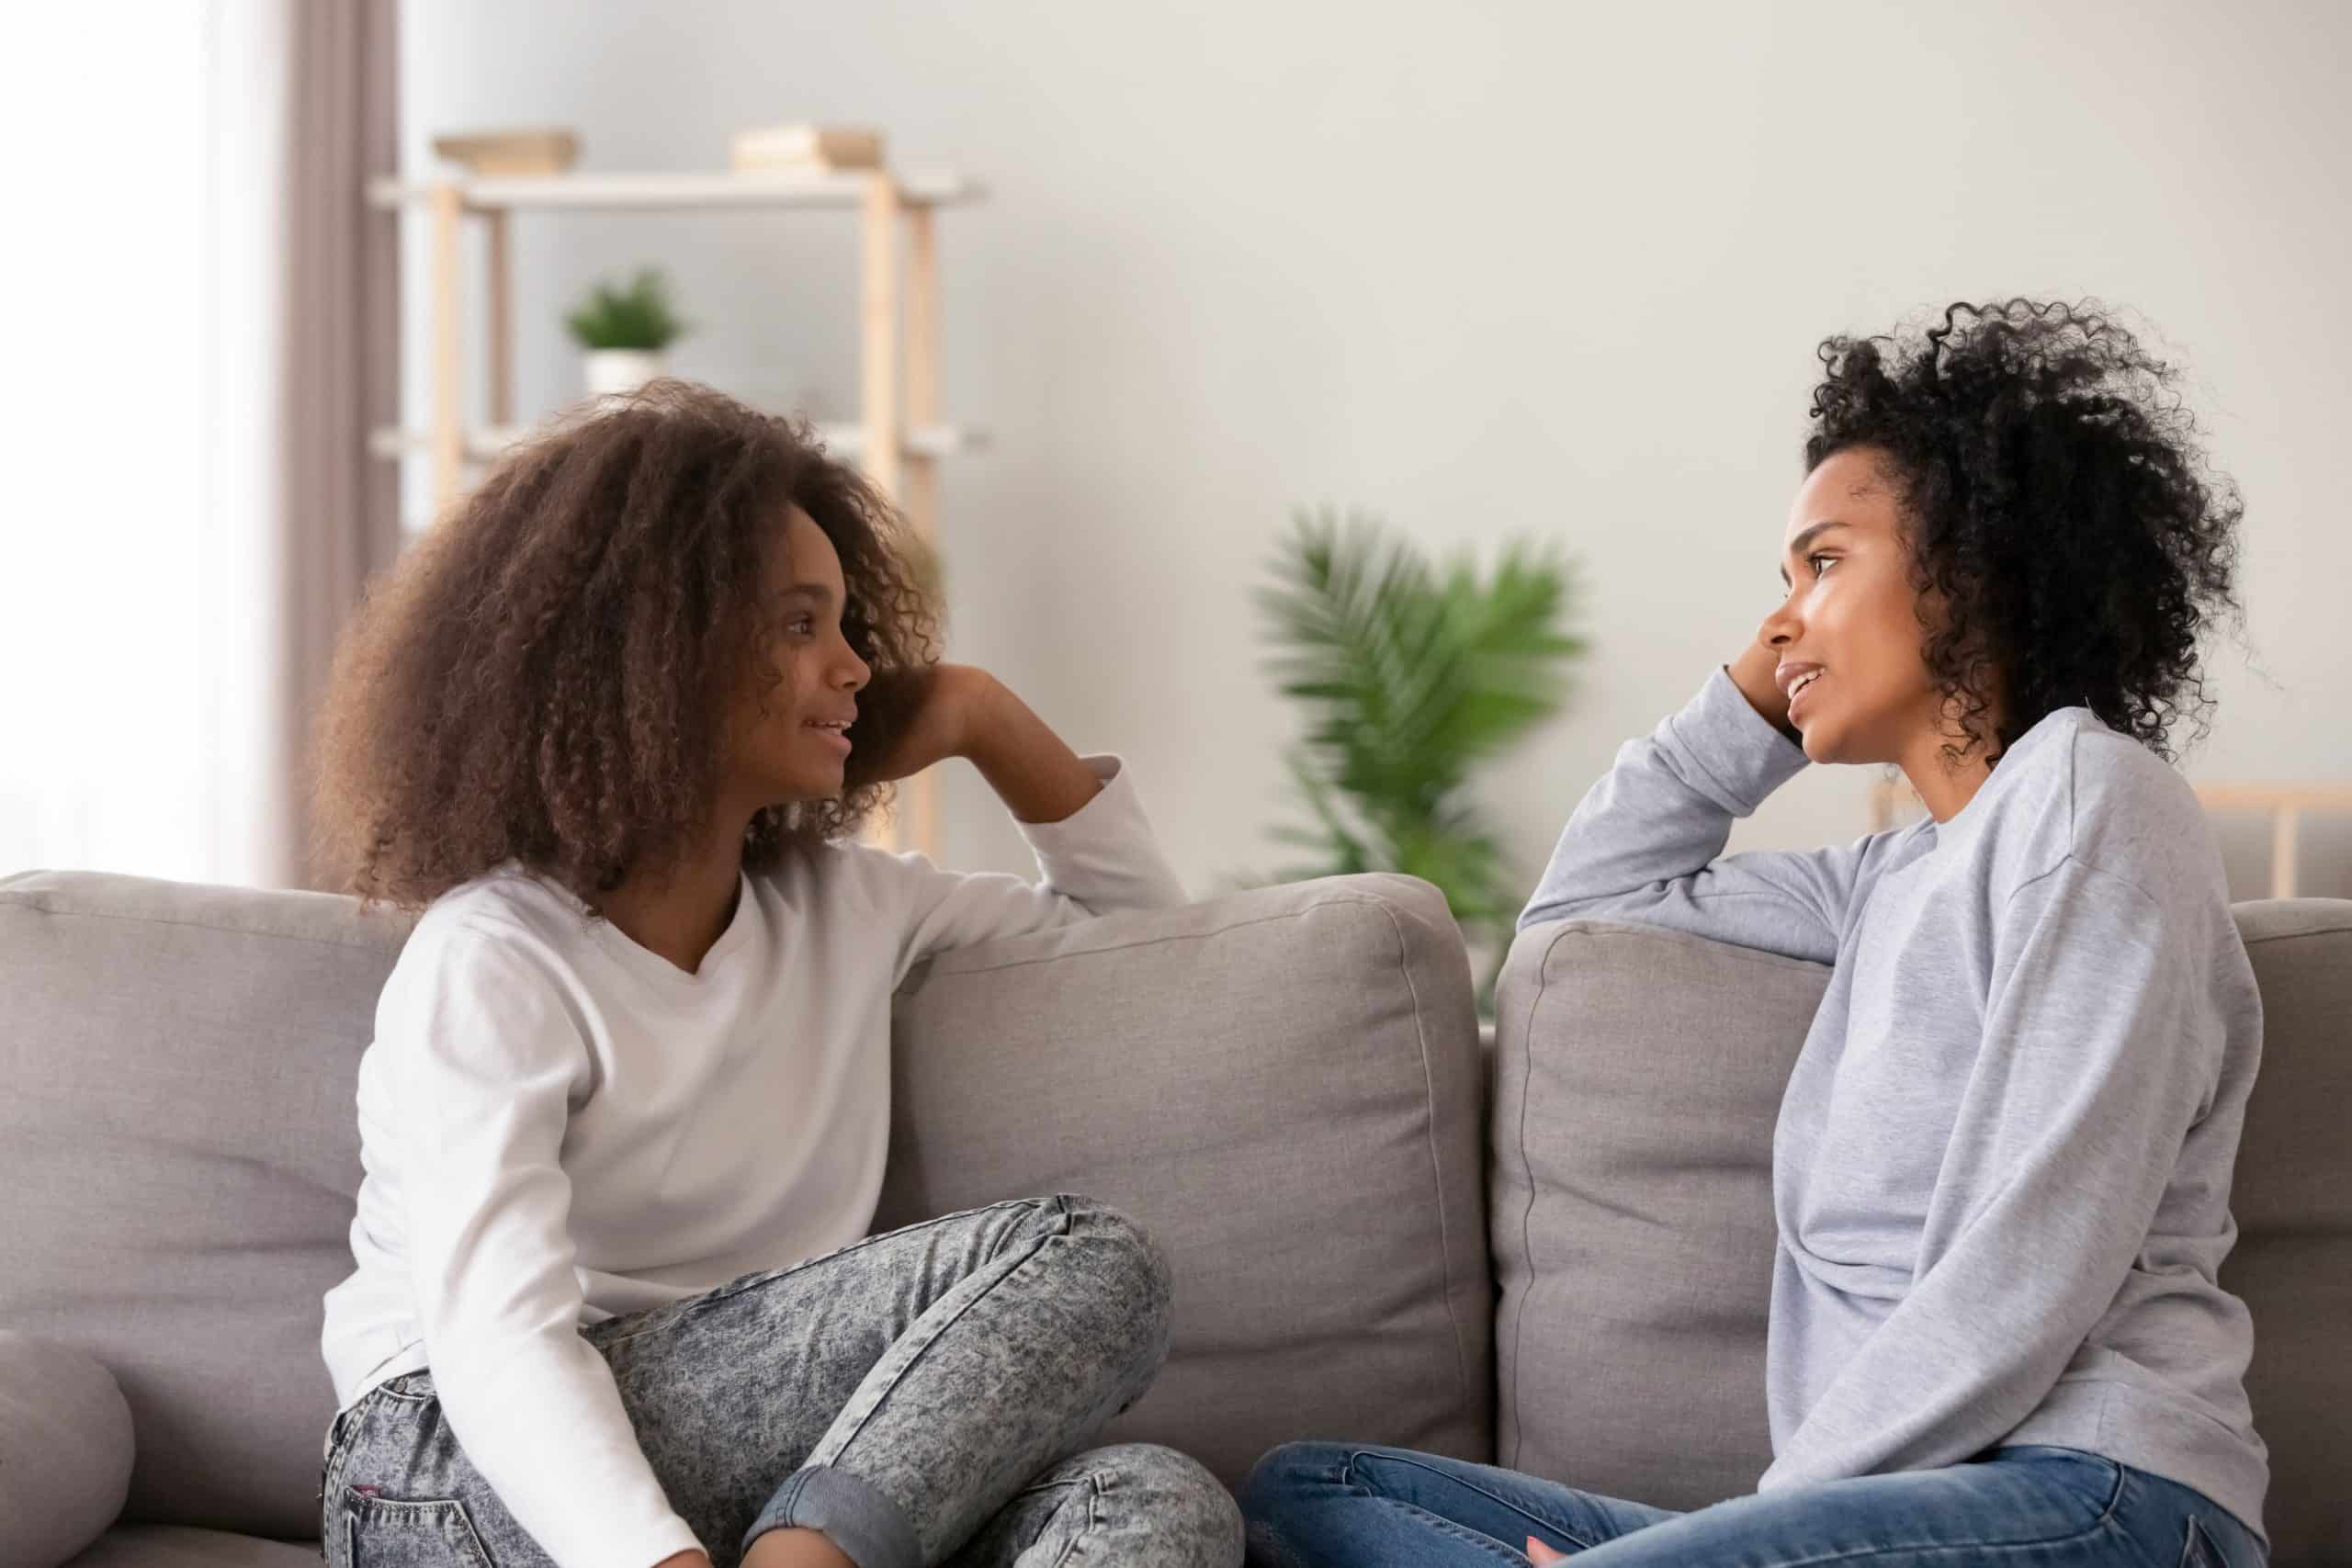 stock image of a mom speaking with her daughter about eating disorder interventions in Huntington Beach, CA